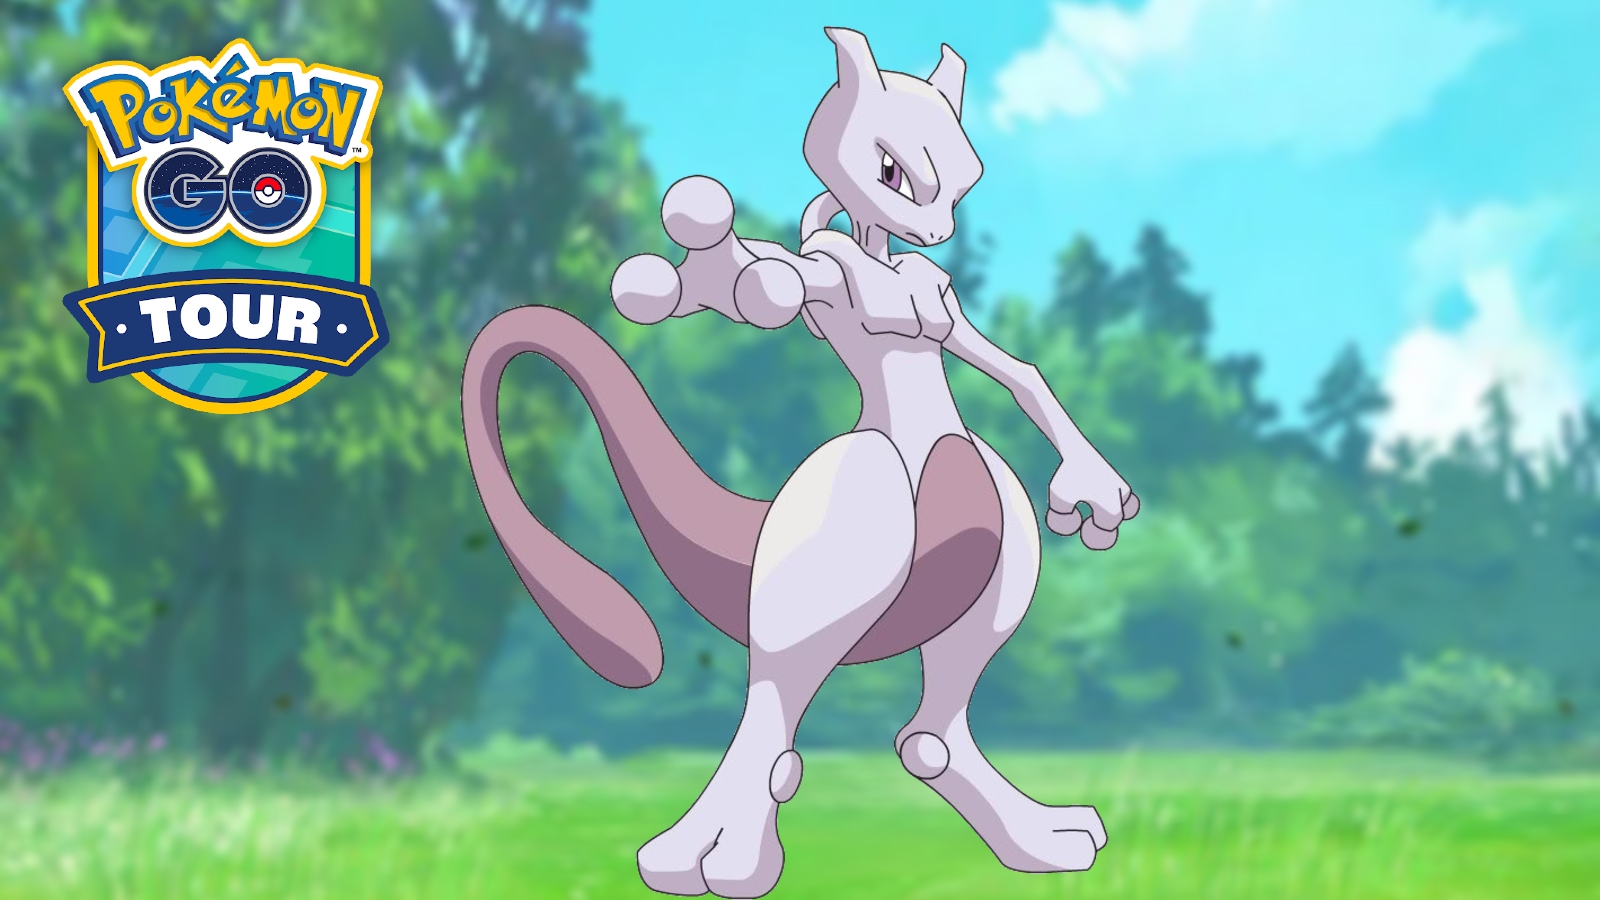 Here Are The Best Pokemon GO Mewtwo Raid Counters